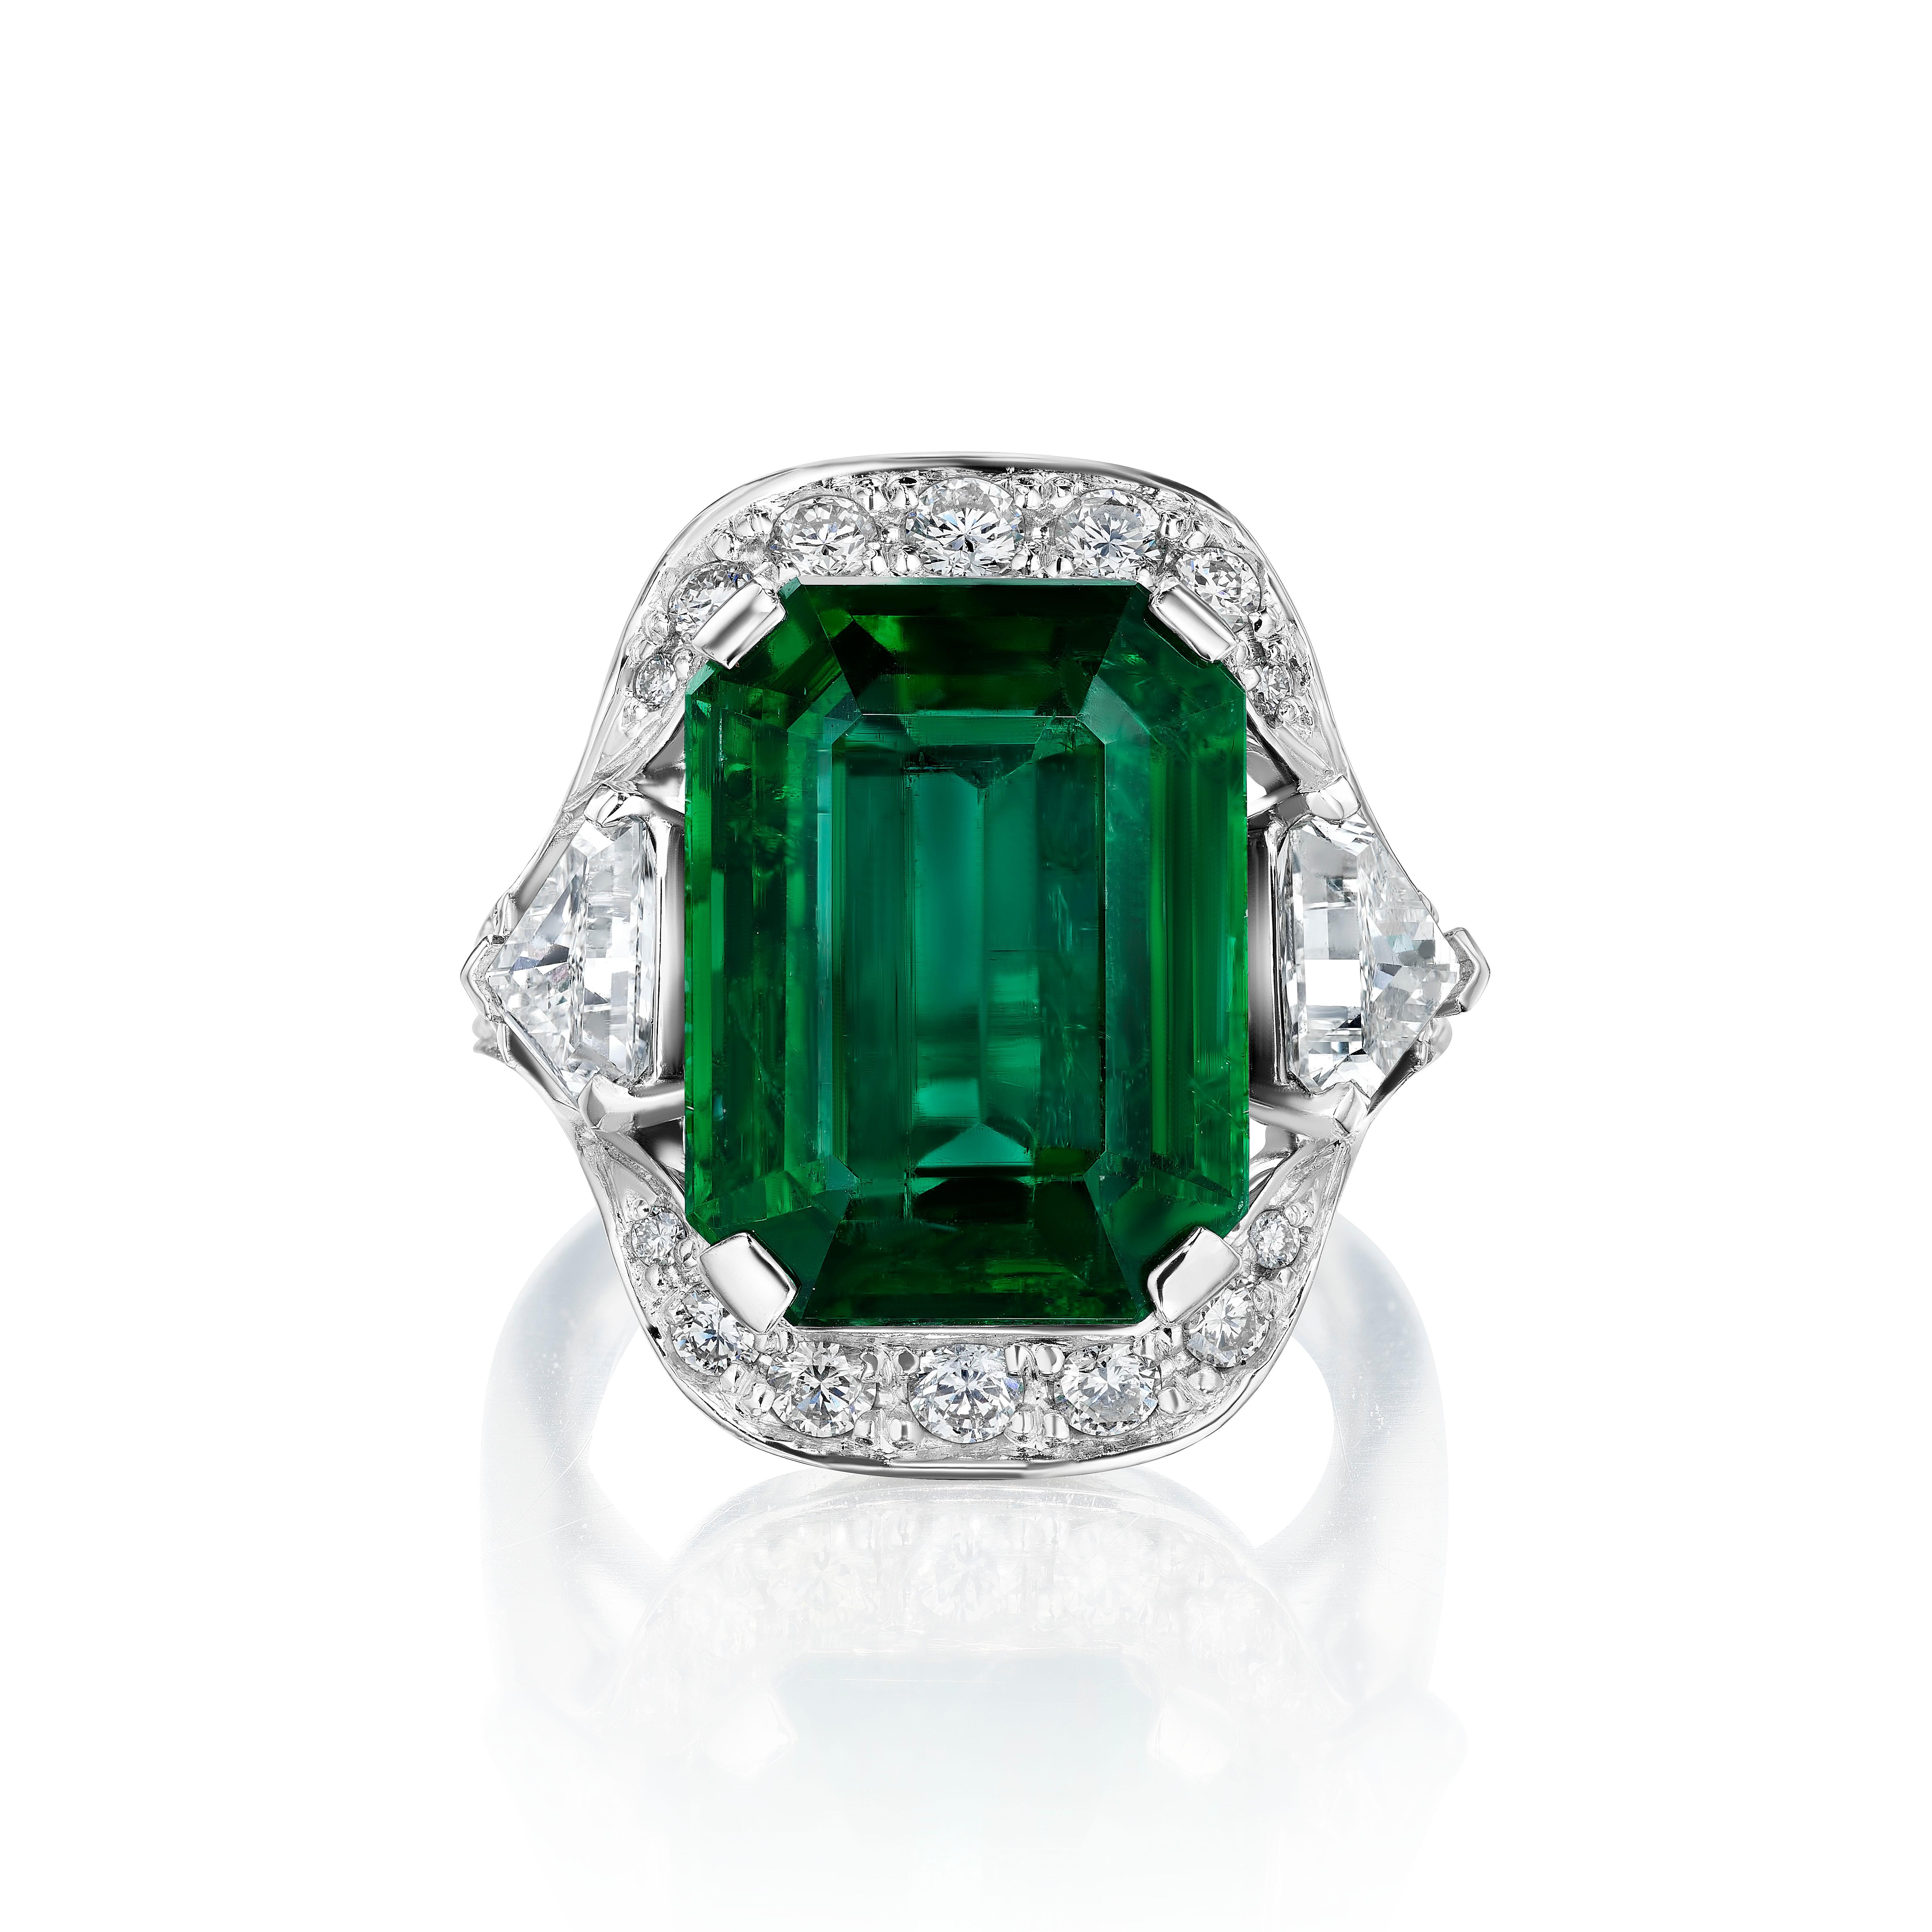 Emerald Cut Auction - AGL Certified 10.08 Carat Emerald and 2.30 Carat Diamond Ring For Sale